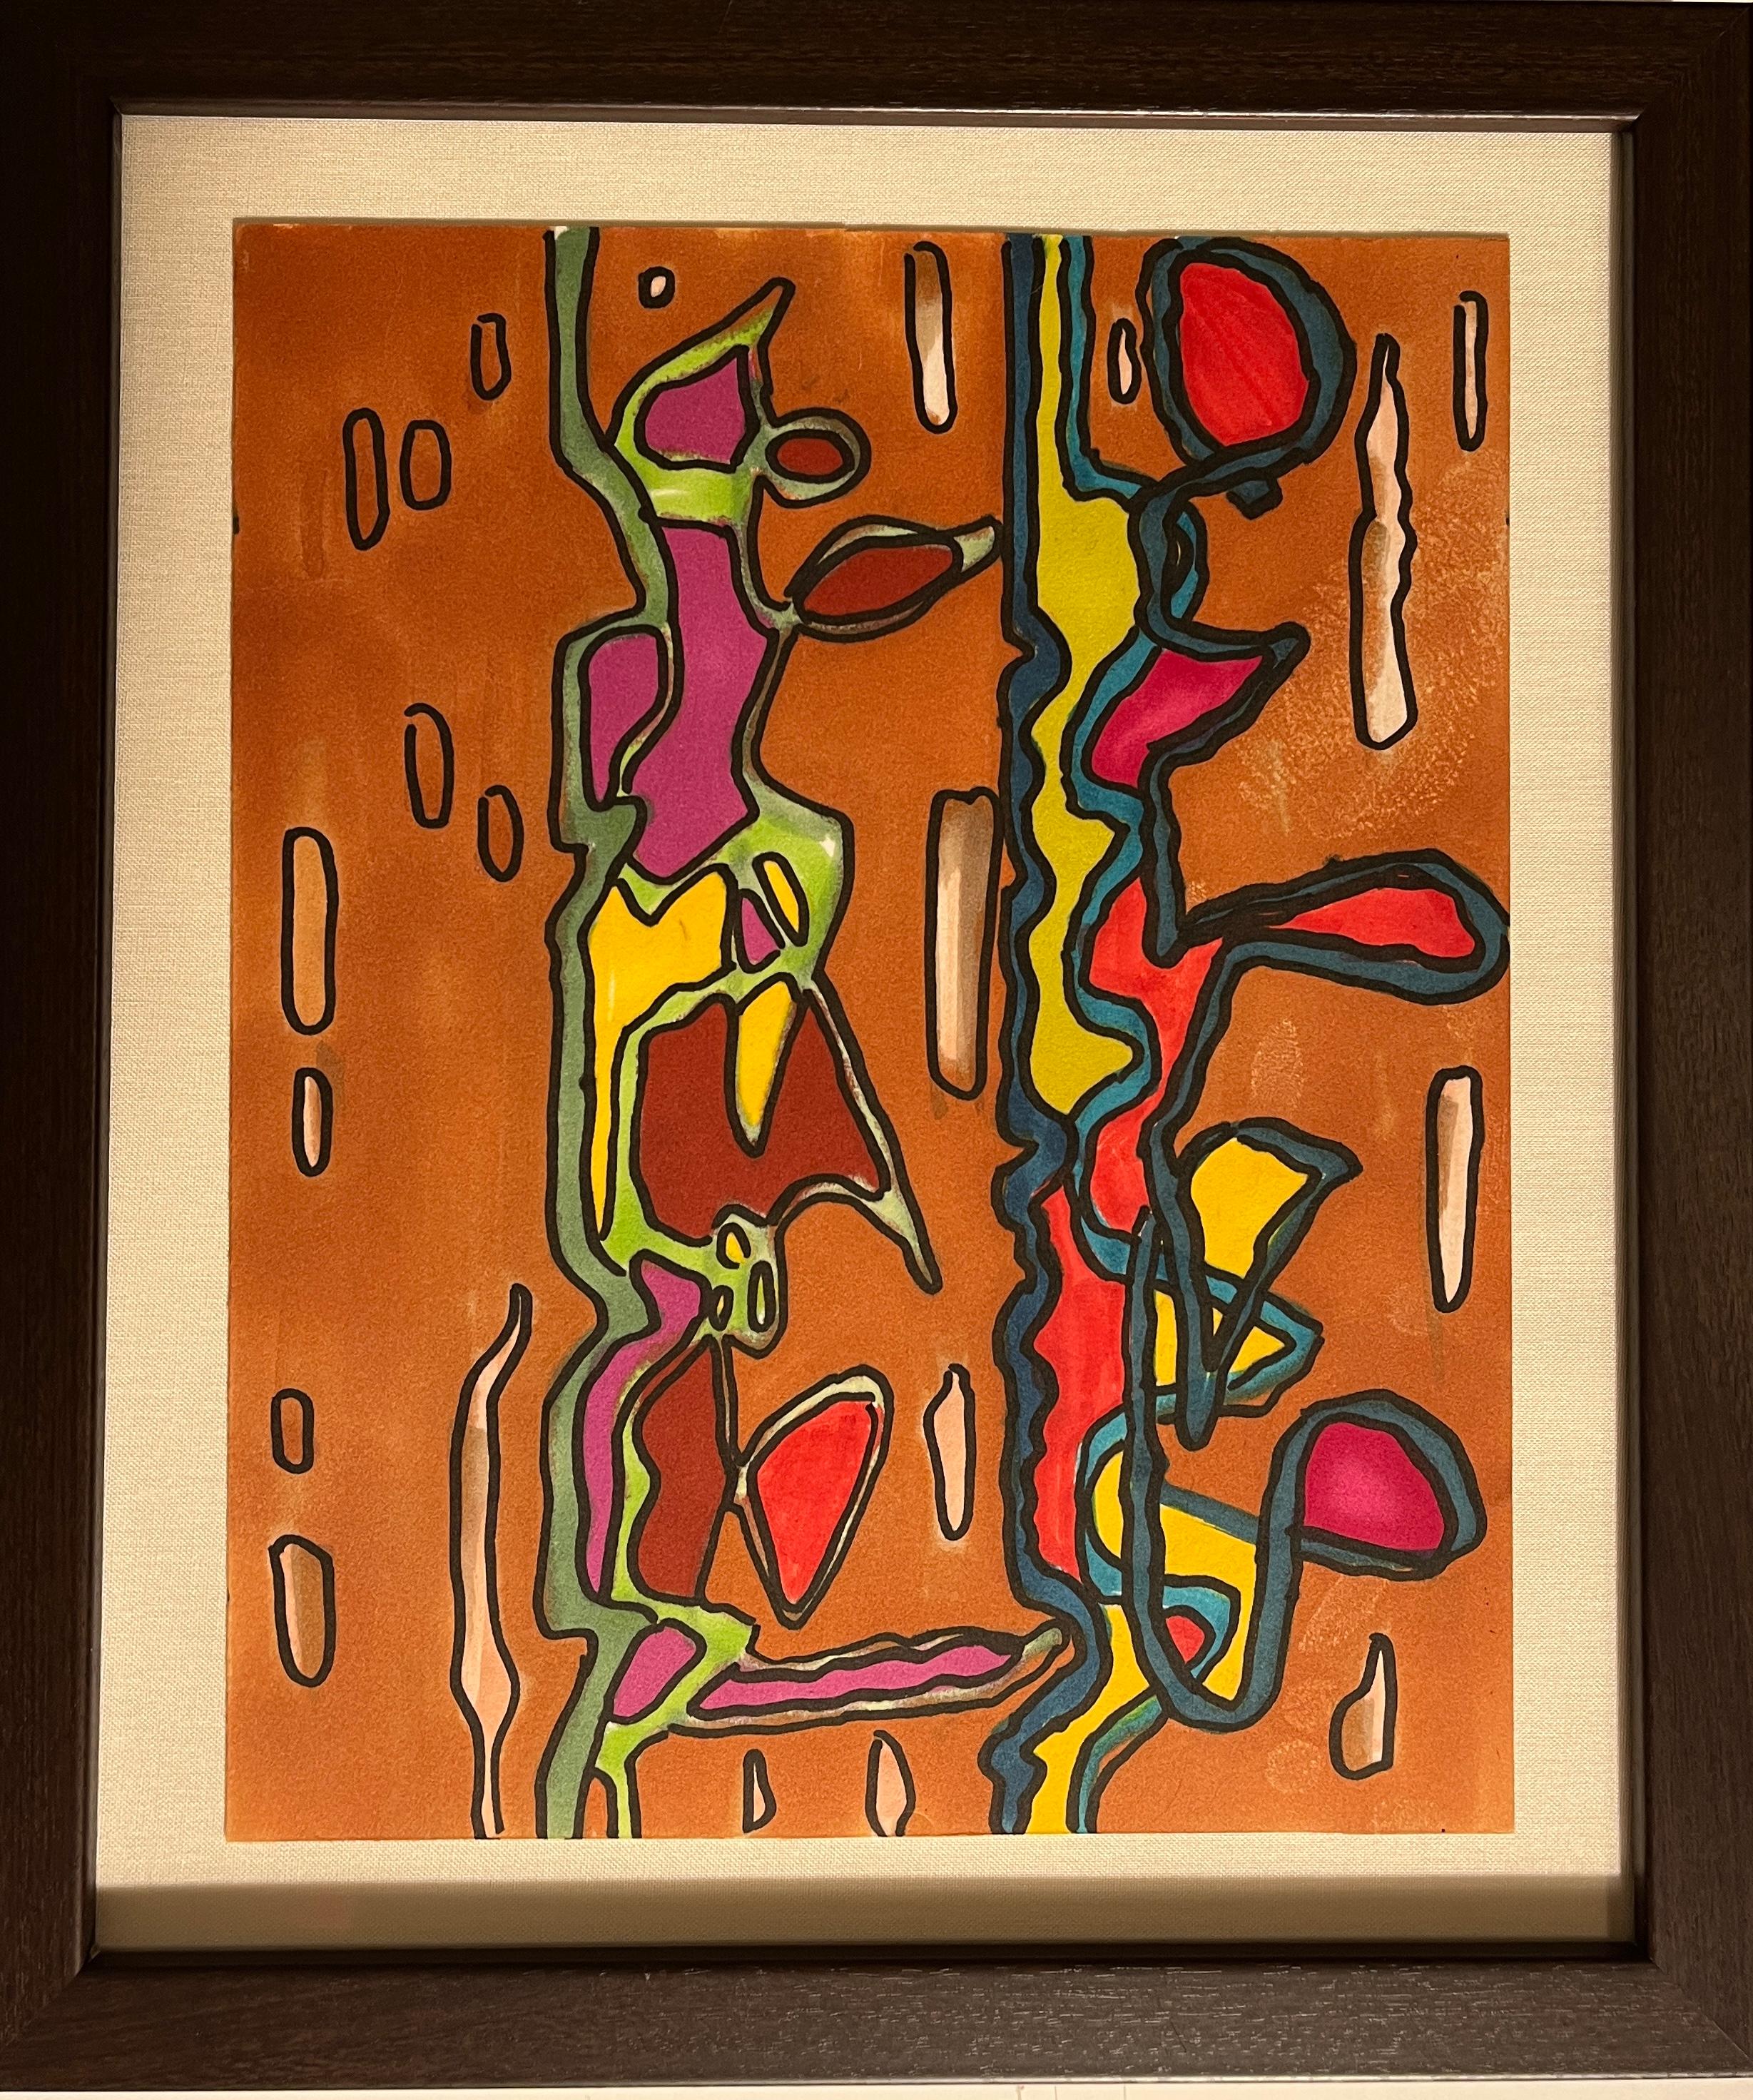 John Peters Abstract Drawing - 1980s "Brown DNA" Abstract Marker Drawing